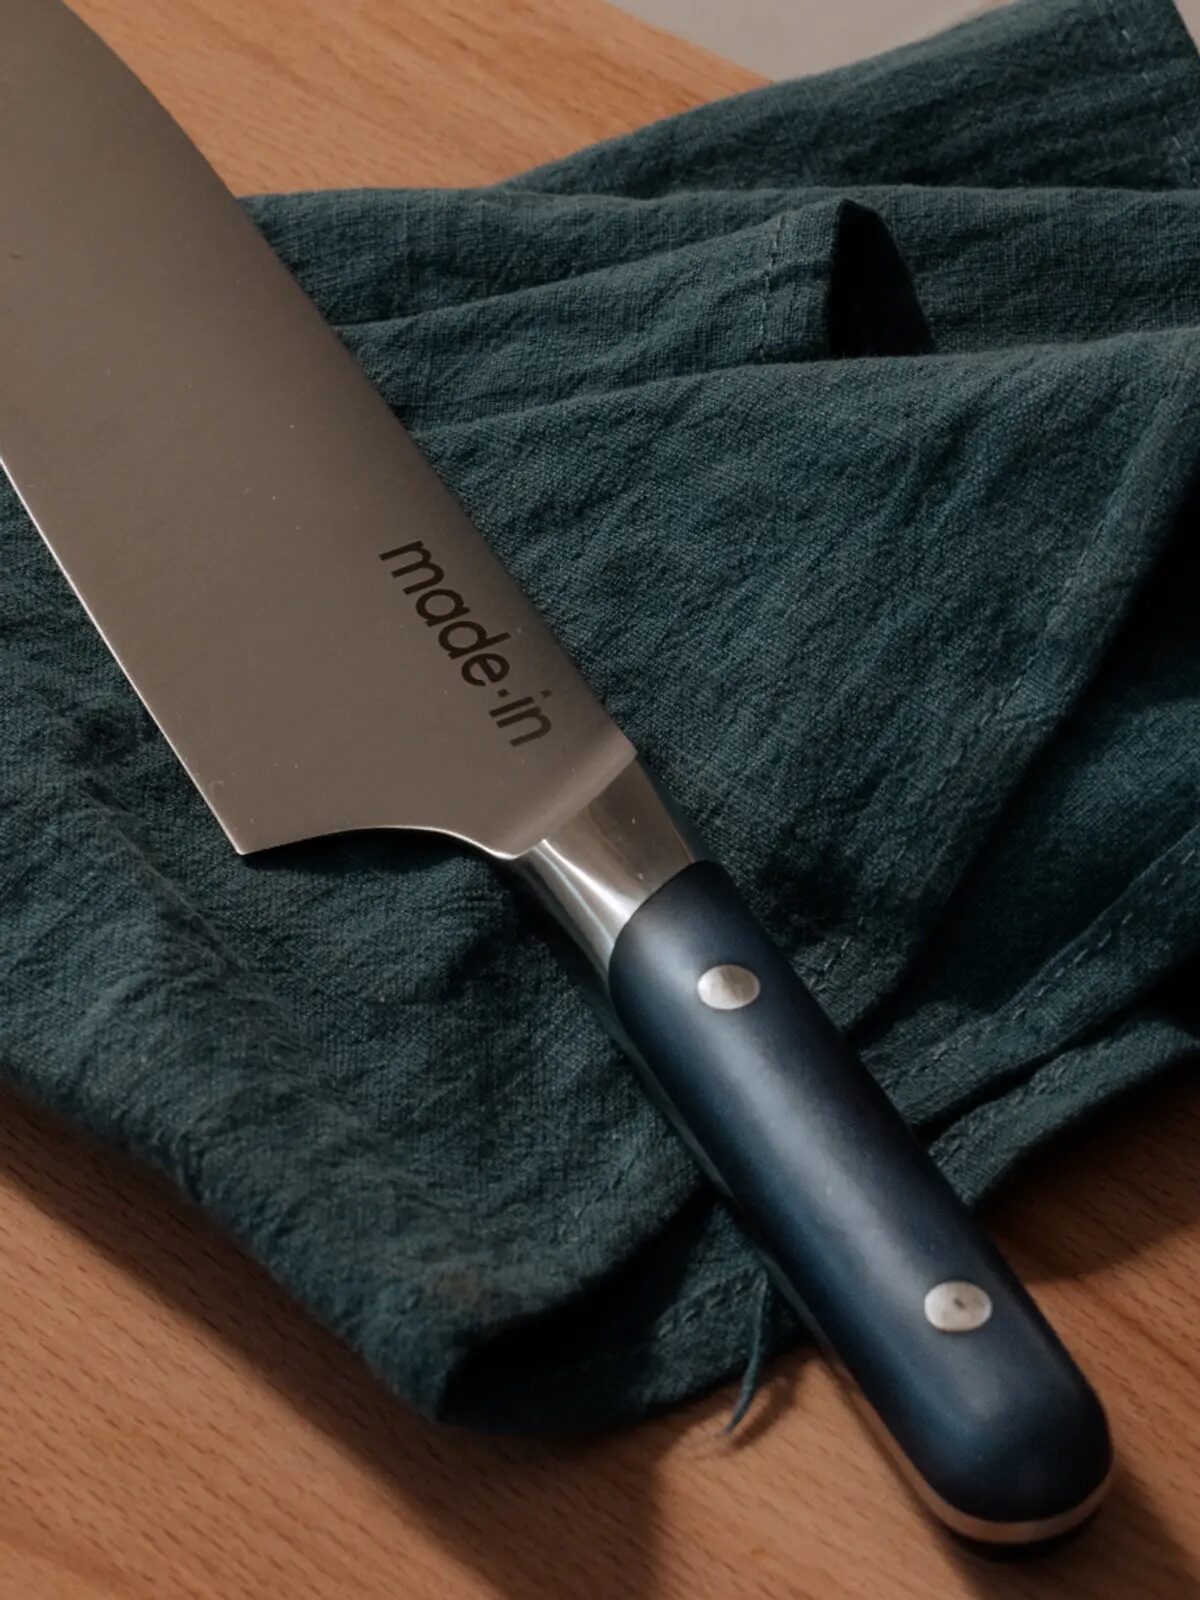 A chef's knife with a black handle on a dark green cloth, with the brand "made in" visible on the blade.